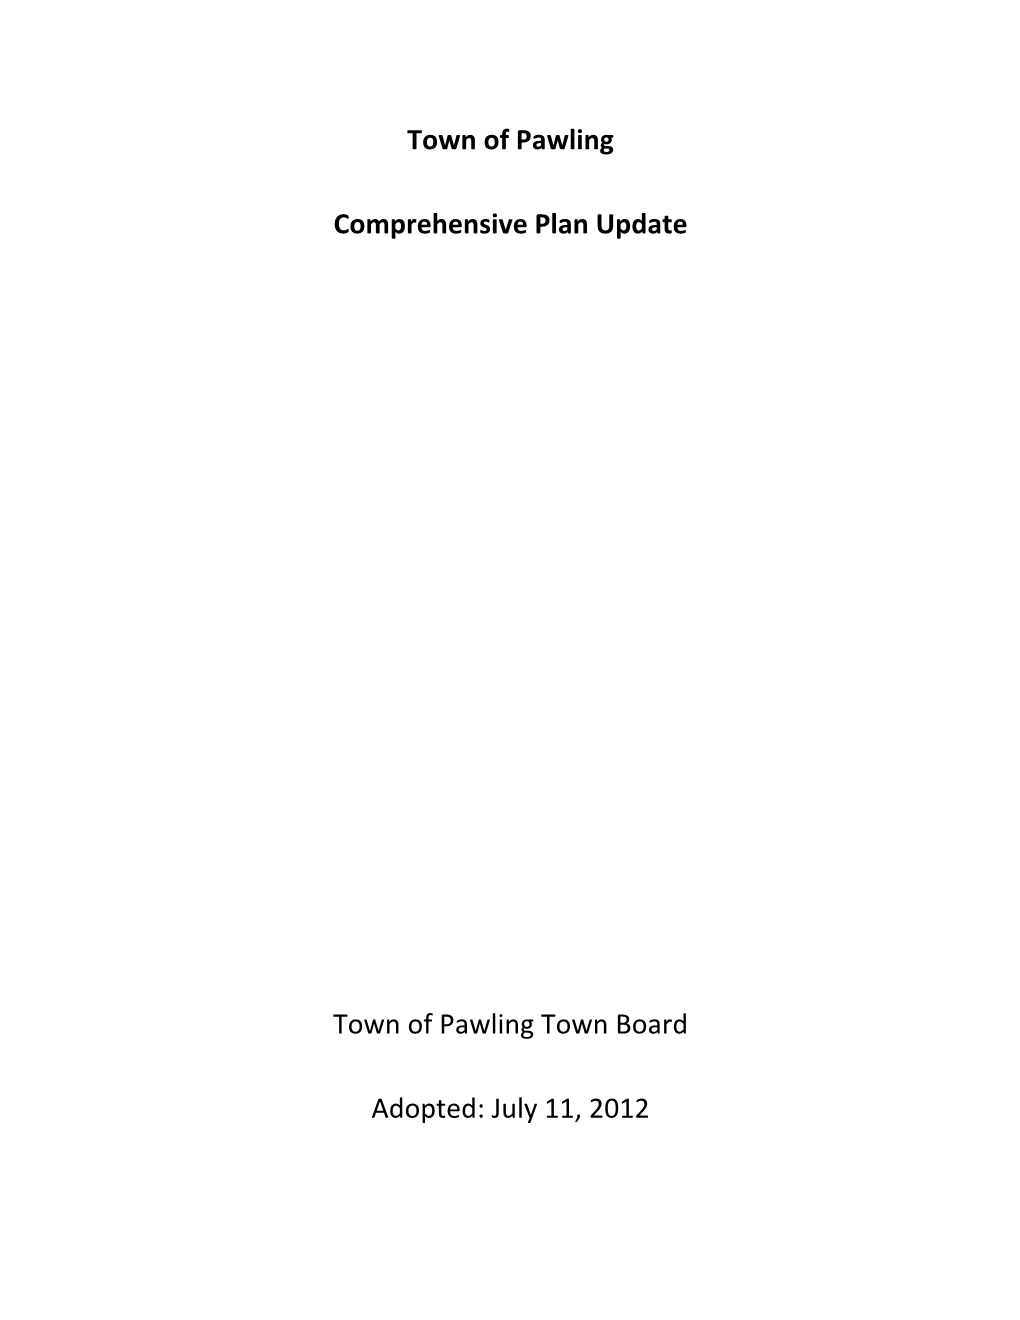 Town of Pawling Comprehensive Plan Update Town of Pawling Town